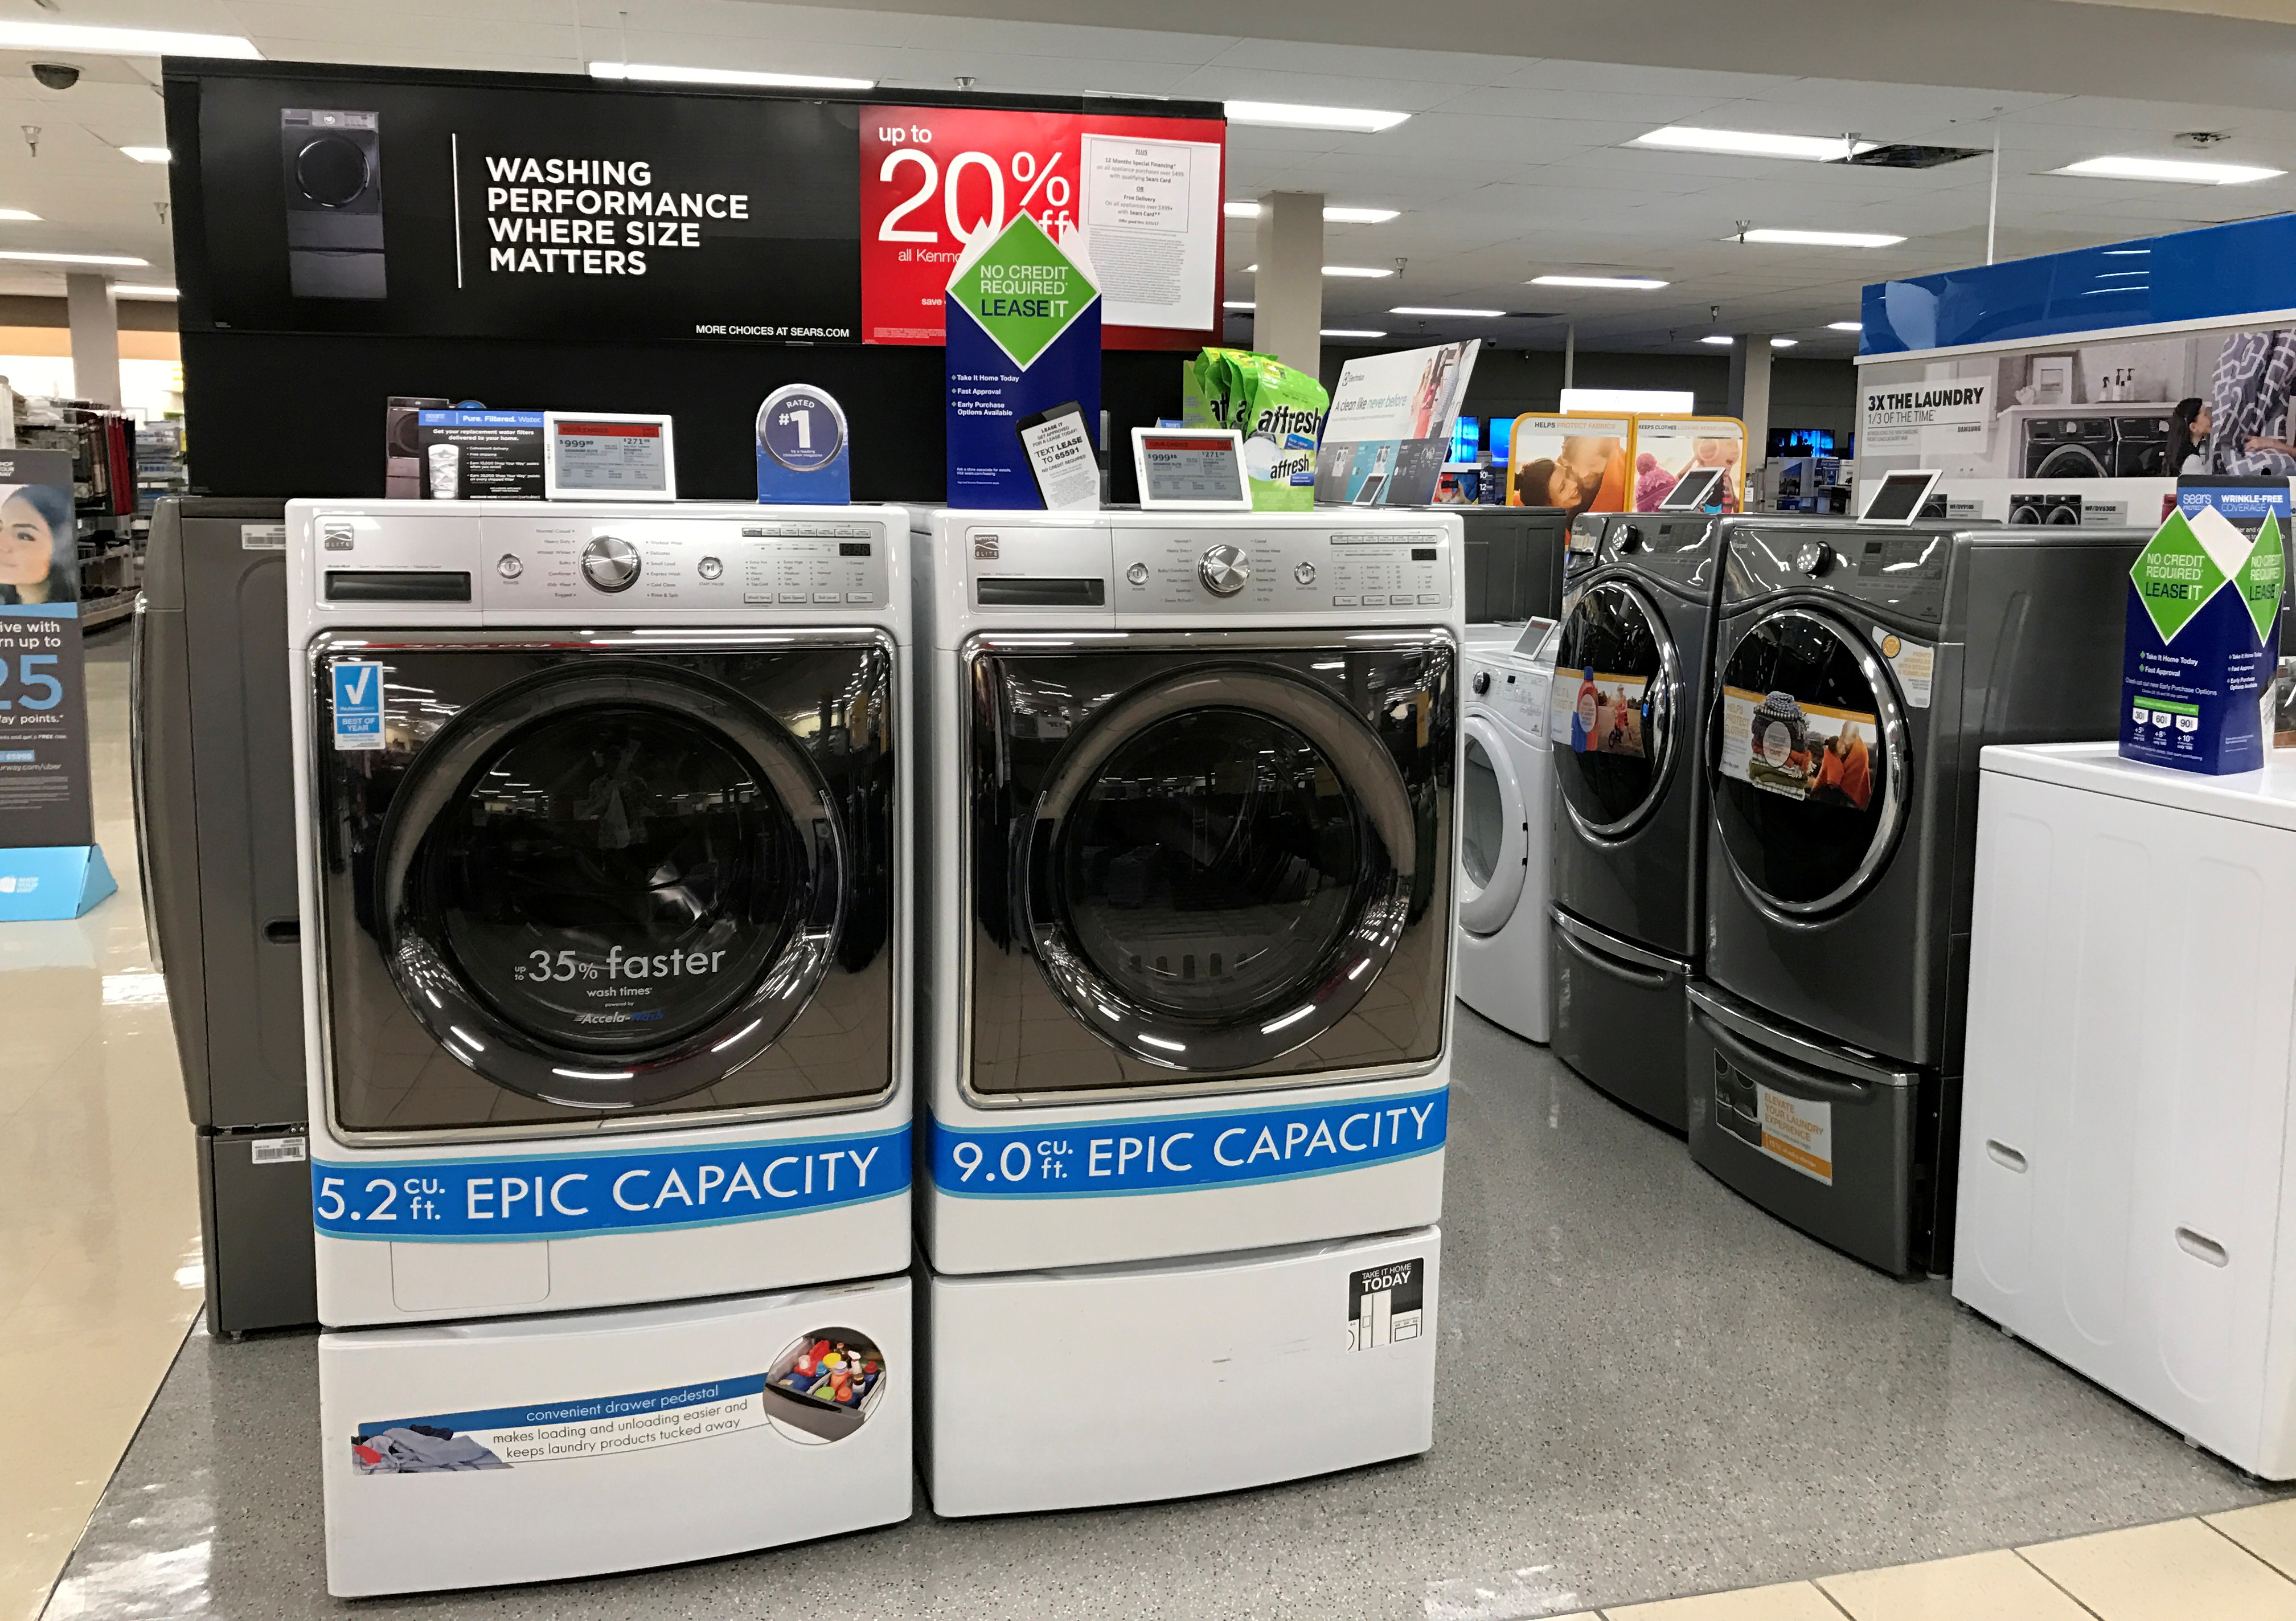 Sears Kenmore washing machines are shown for sale